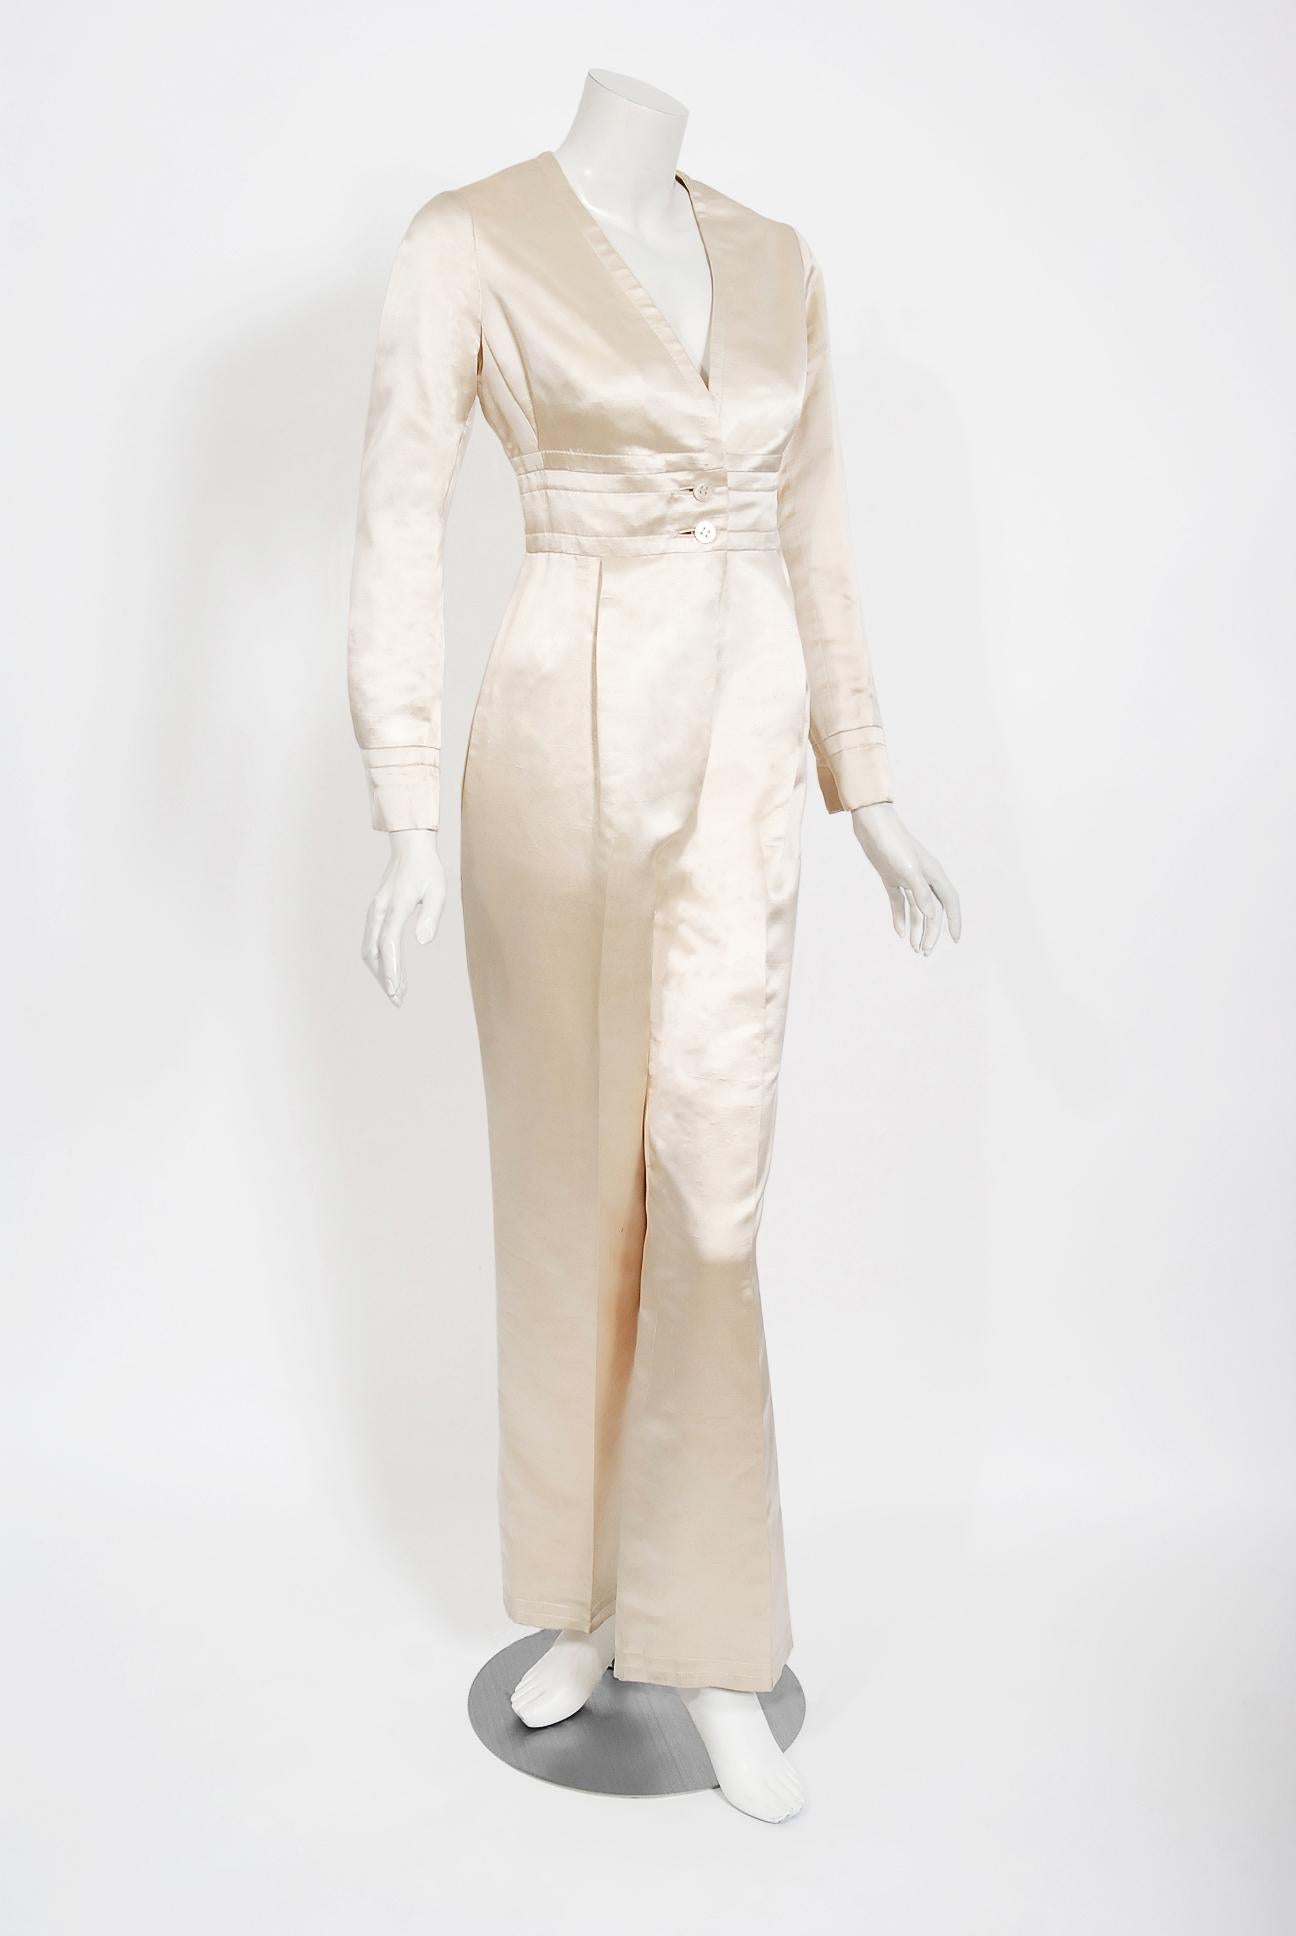 A gorgeous Galanos Couture ivory-creme silk satin jumpsuit dating back to the mid 1960's. Dedication to excellence in craftsmanship and design was the foundation of James Galanos' career. The quality of workmanship found in his clothing is